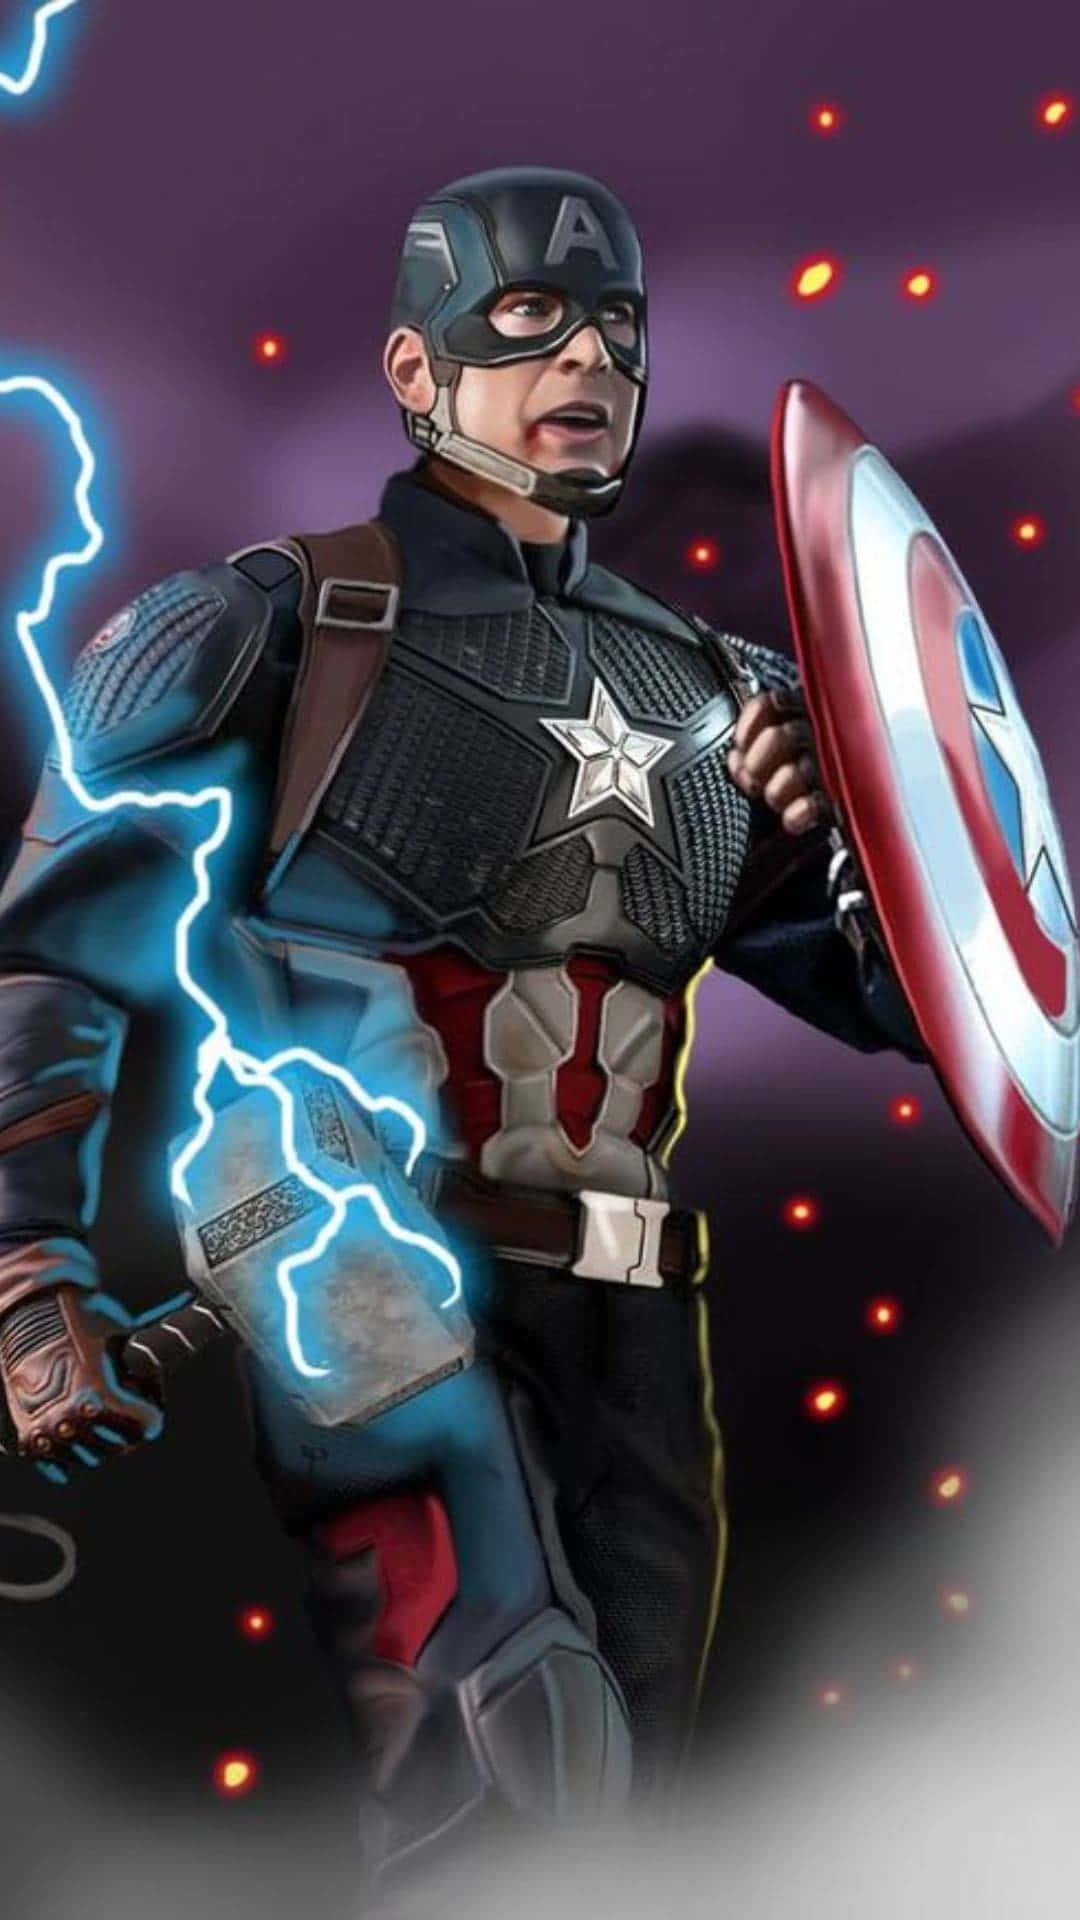 "Be a superhero with the latest Android Captain America app."